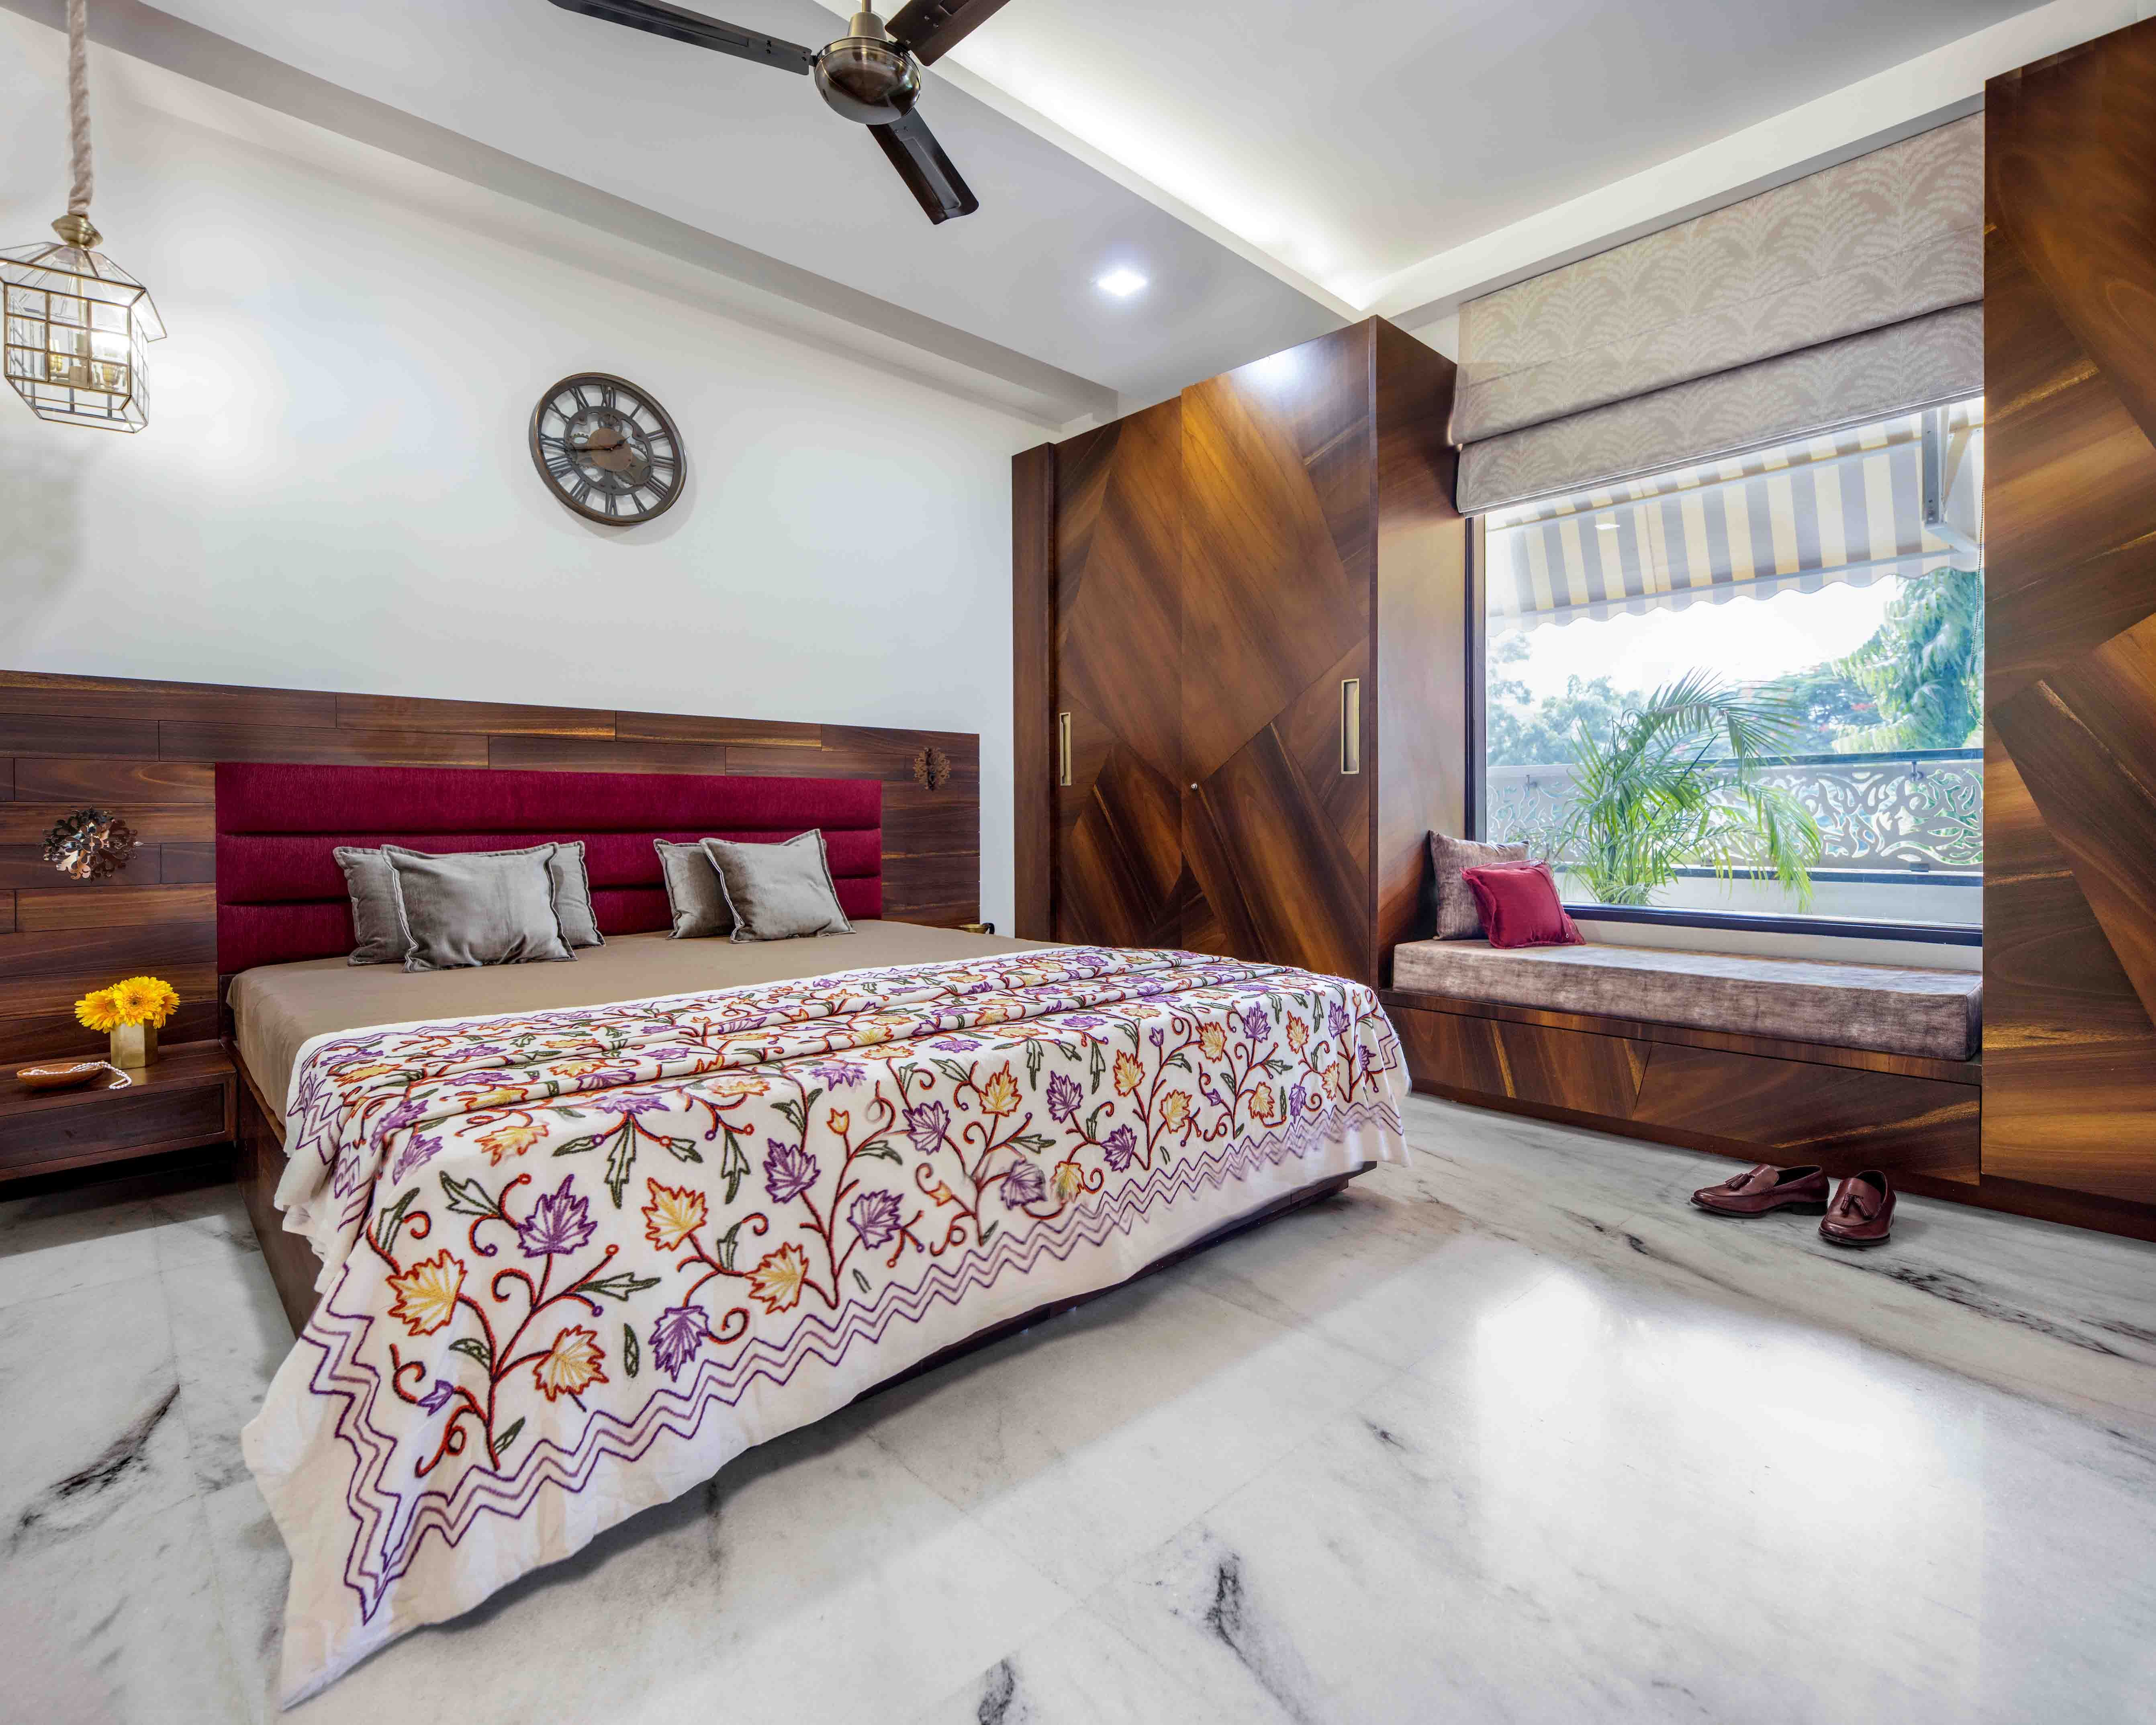 Cotemporary 2-BHK Flat Design In Delhi With Cosy Family Room And Wooden Wall Panelling